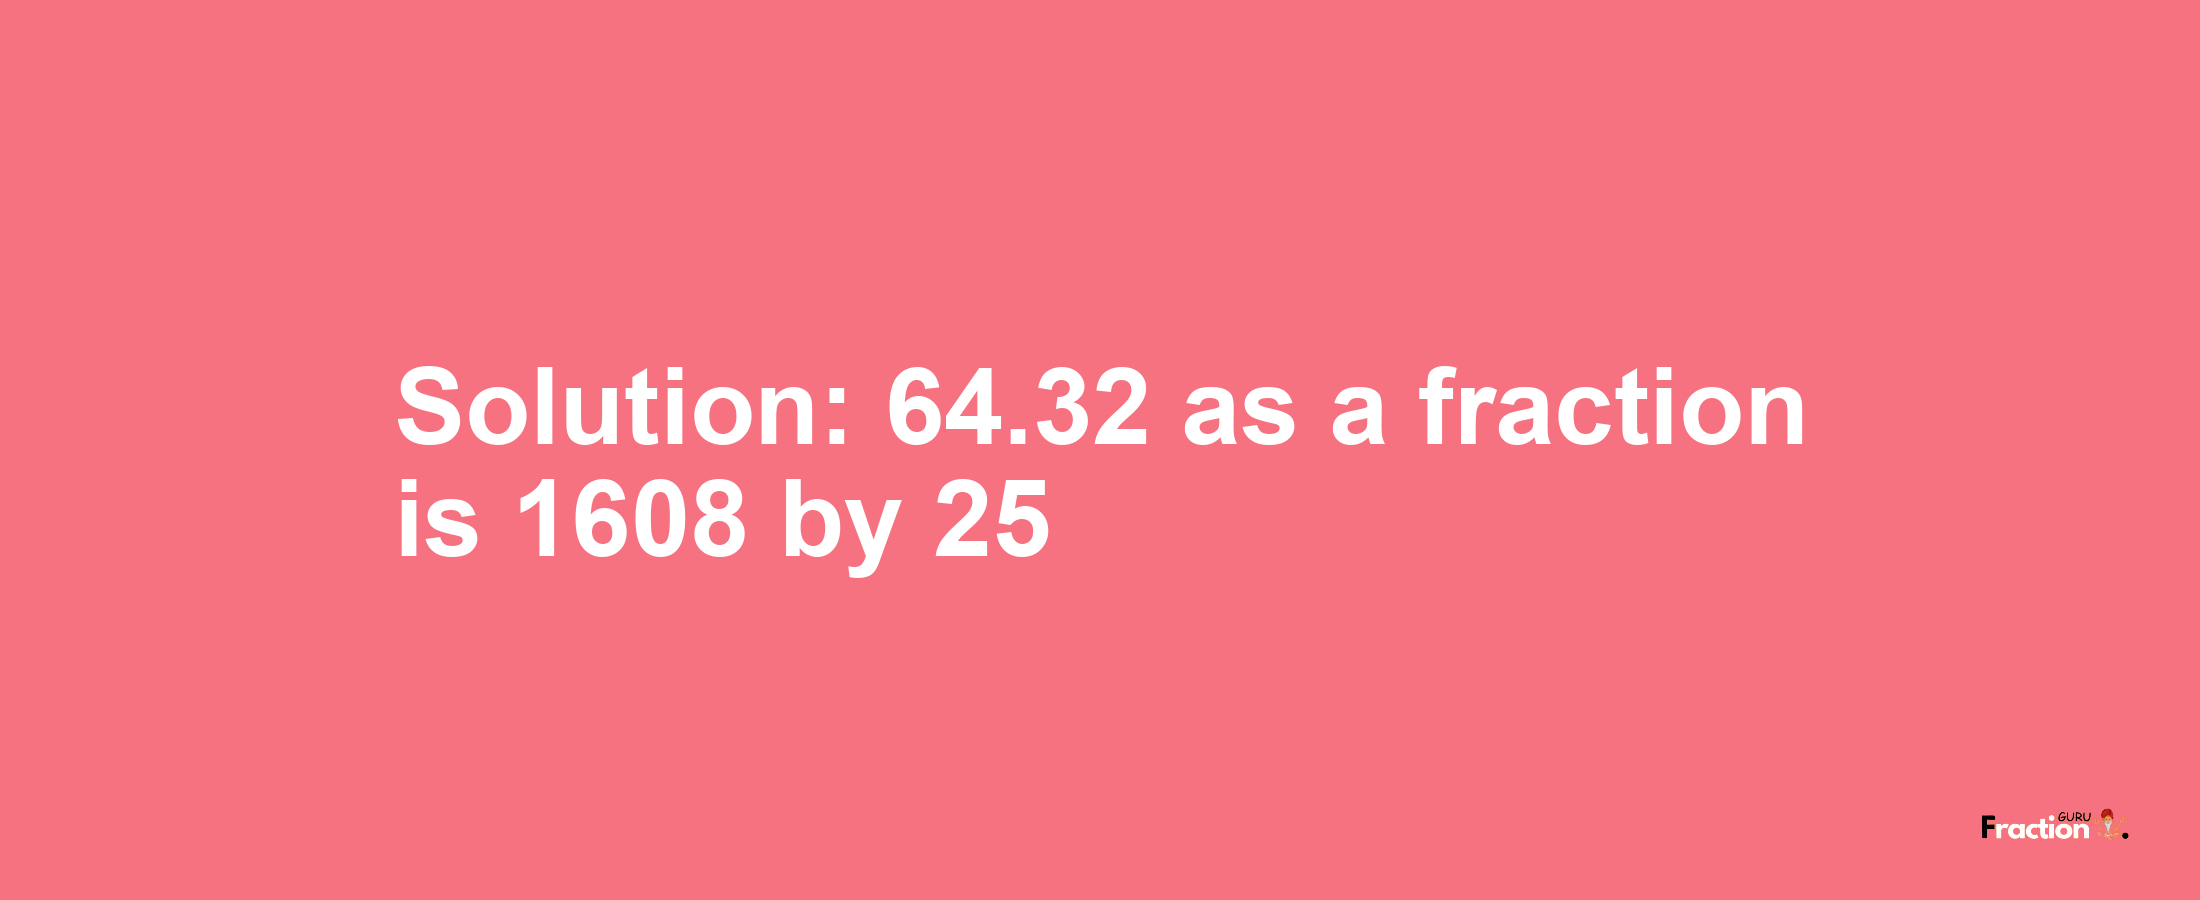 Solution:64.32 as a fraction is 1608/25